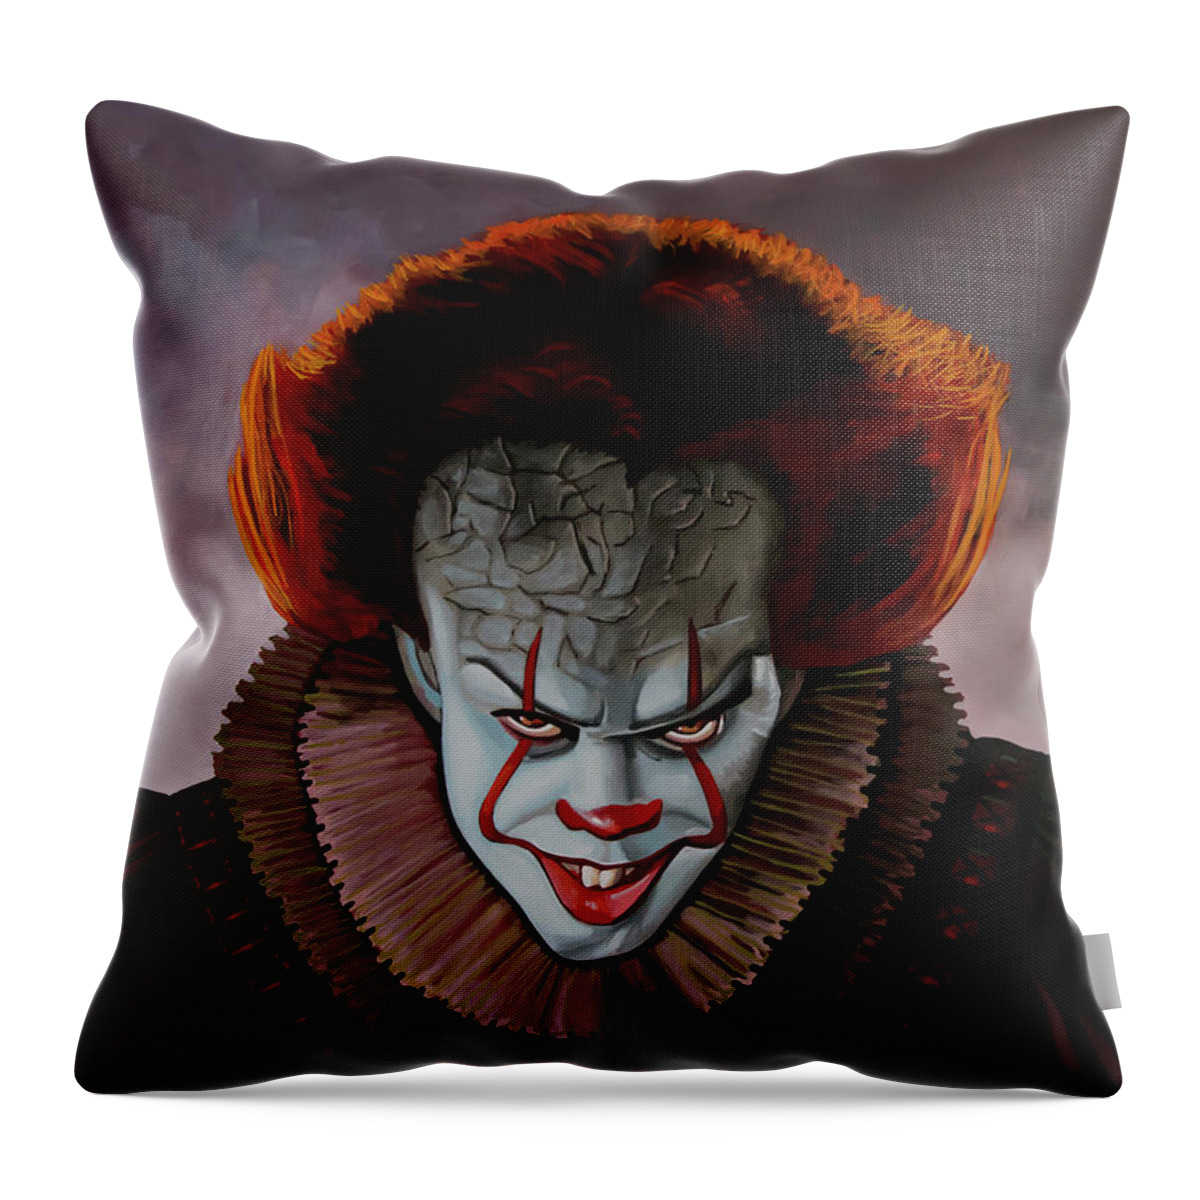 Pennywise Throw Pillow featuring the painting Pennywise Painting 2 by Paul Meijering